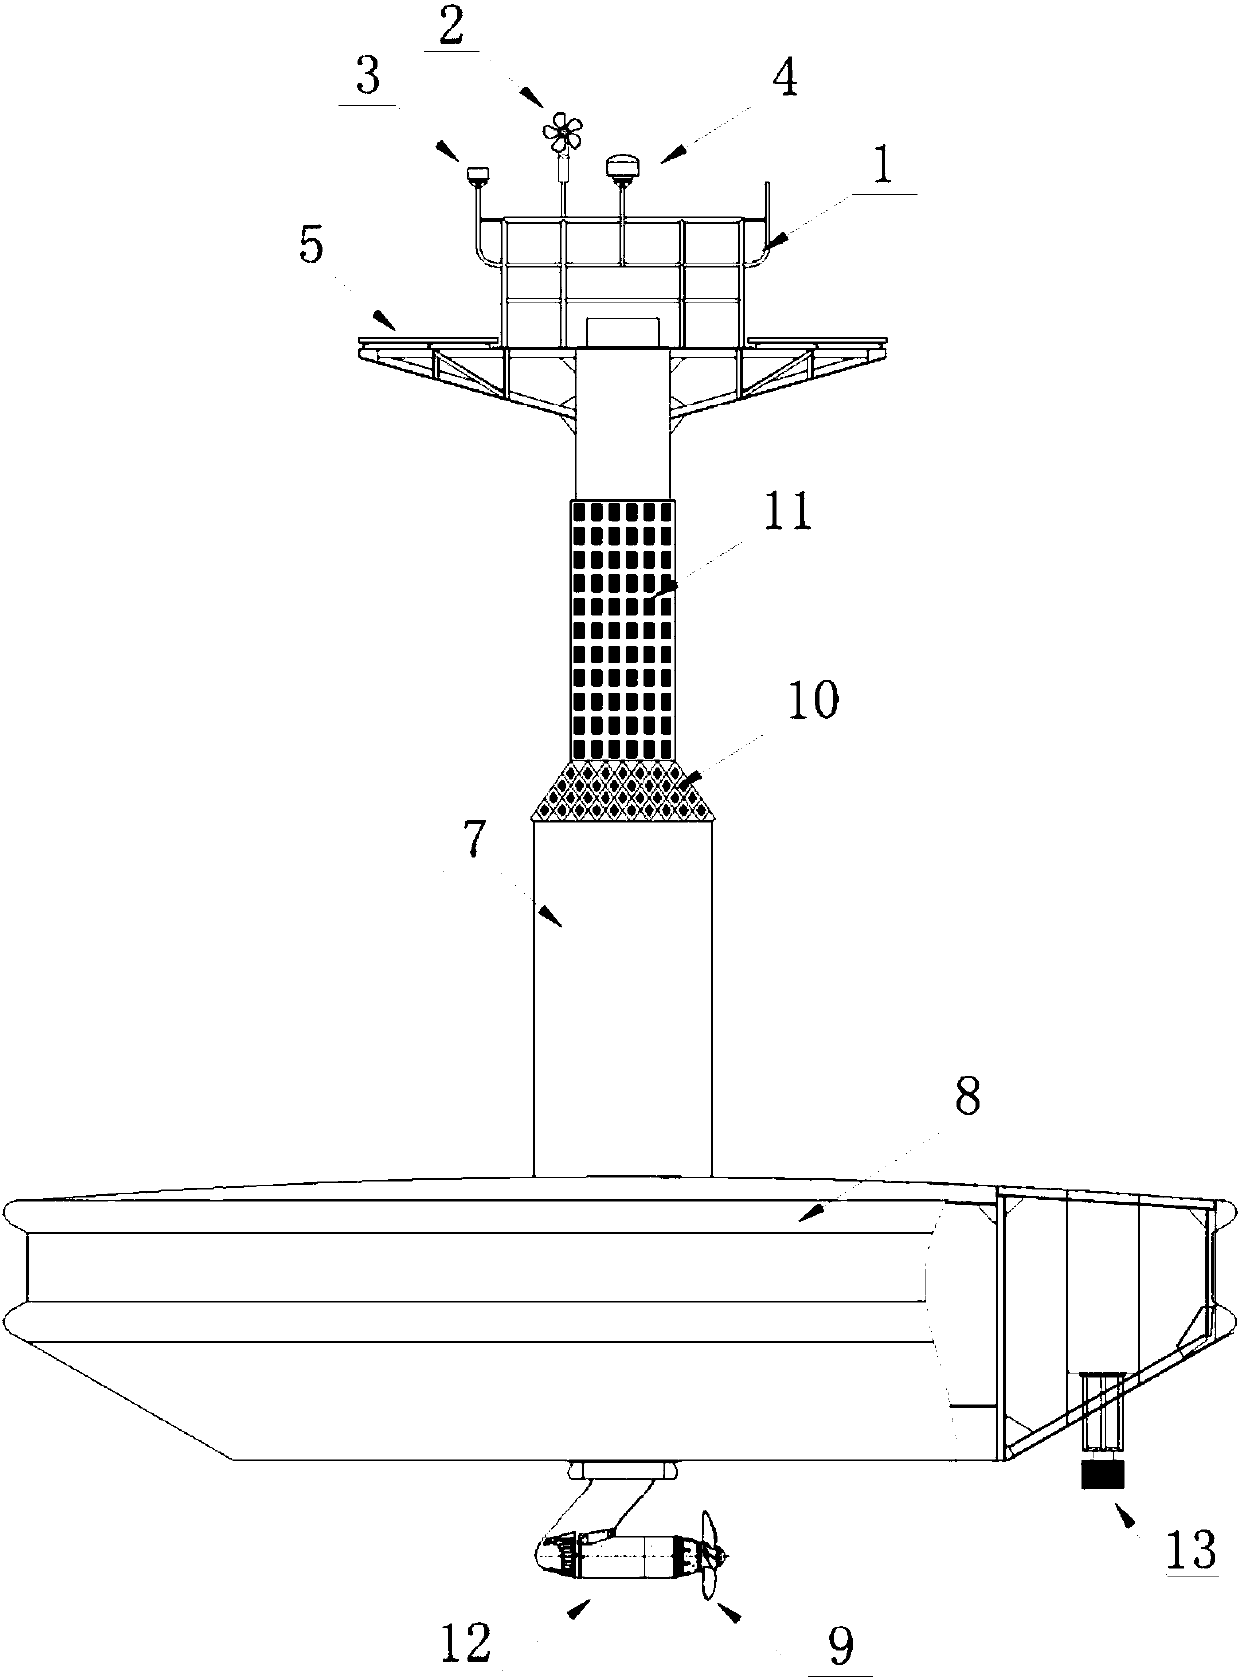 Mooring-free automatic restoring deep and high sea fixed-point observation buoy and method